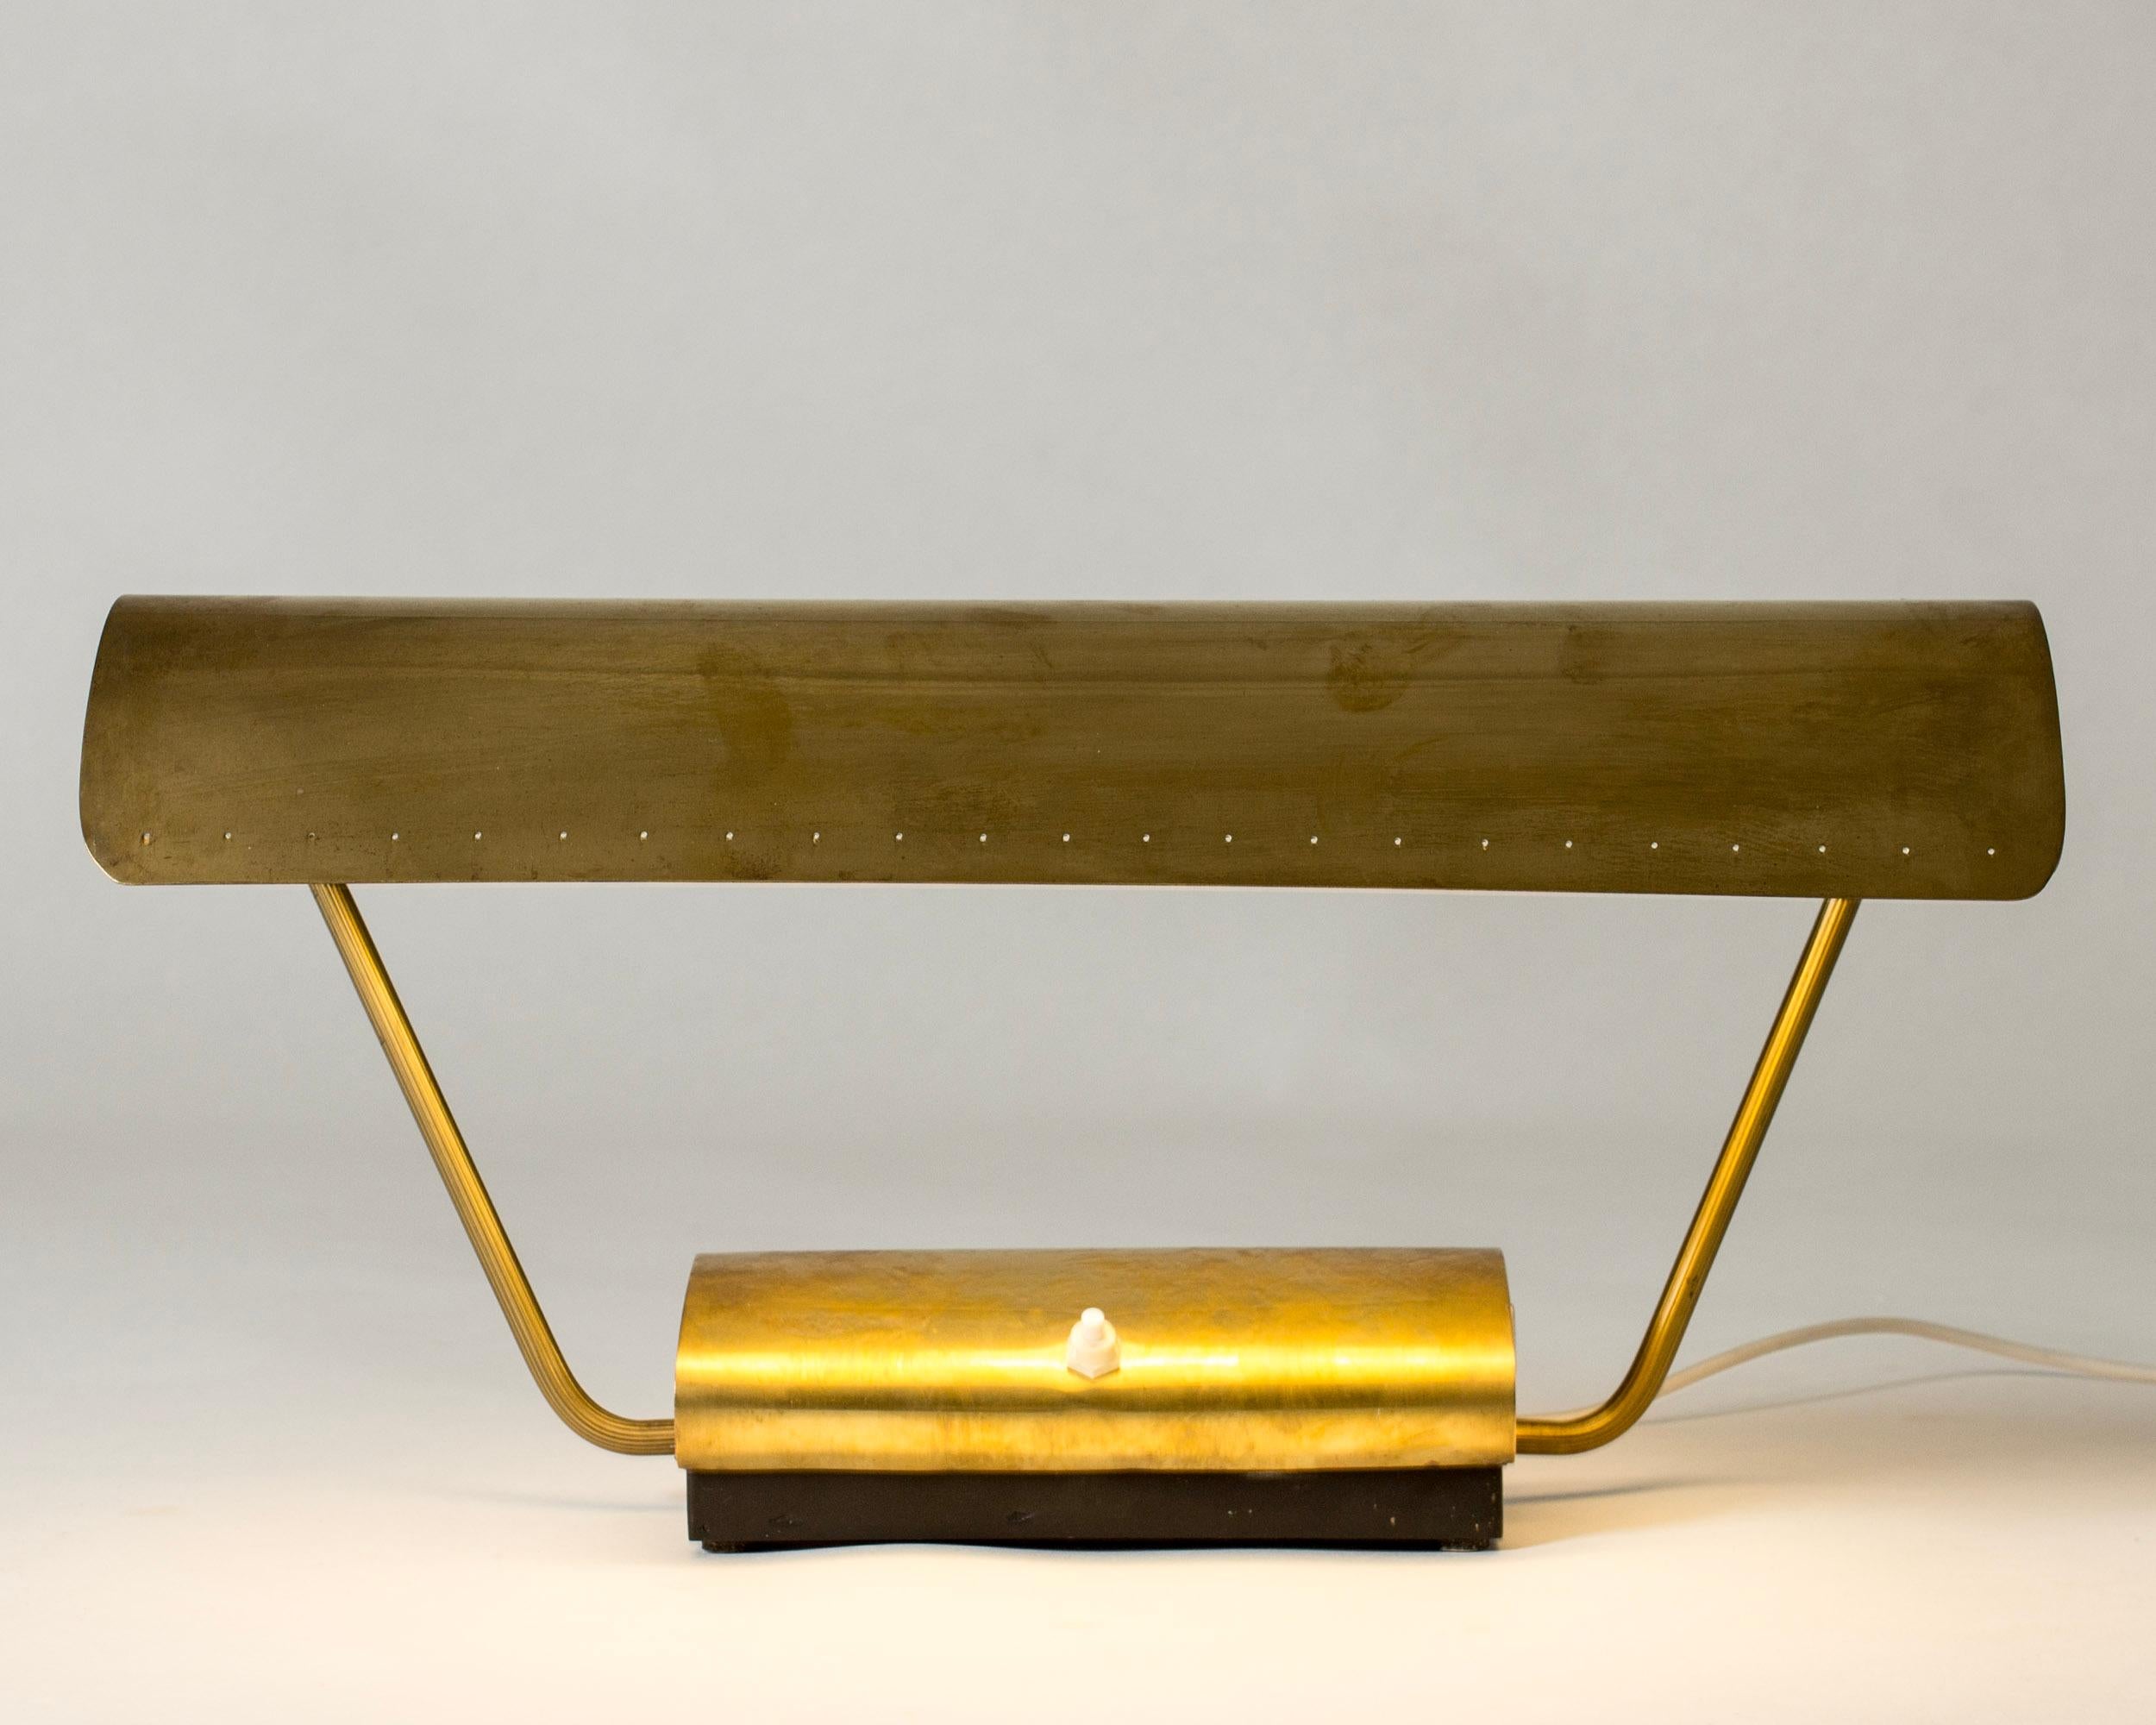 Cool midcentury desk lamp from Philips, made from brass in a wide design. Adjustable lamp shade with decorative perforated holes. Flourescent tube light source.